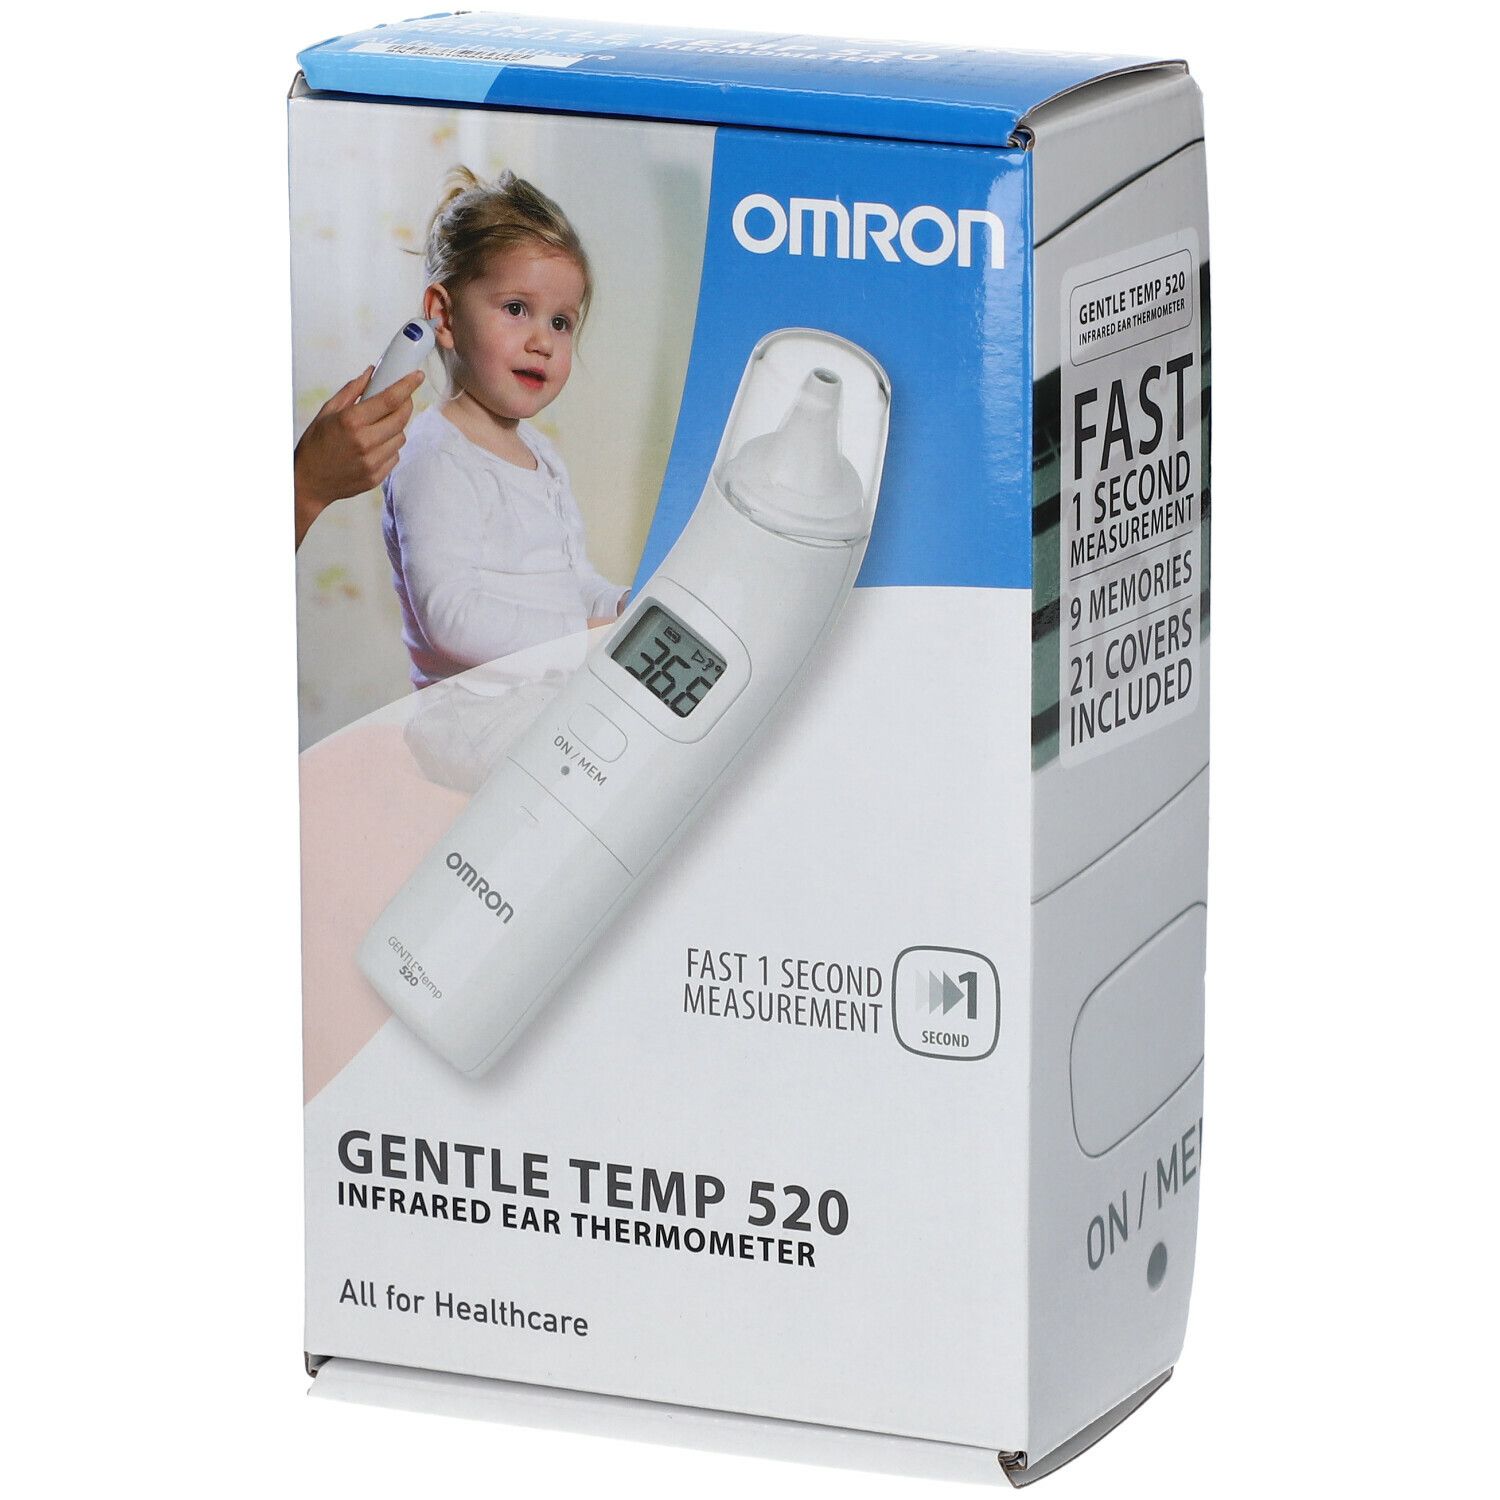 Gentle Temp 521-Ohrthermometer